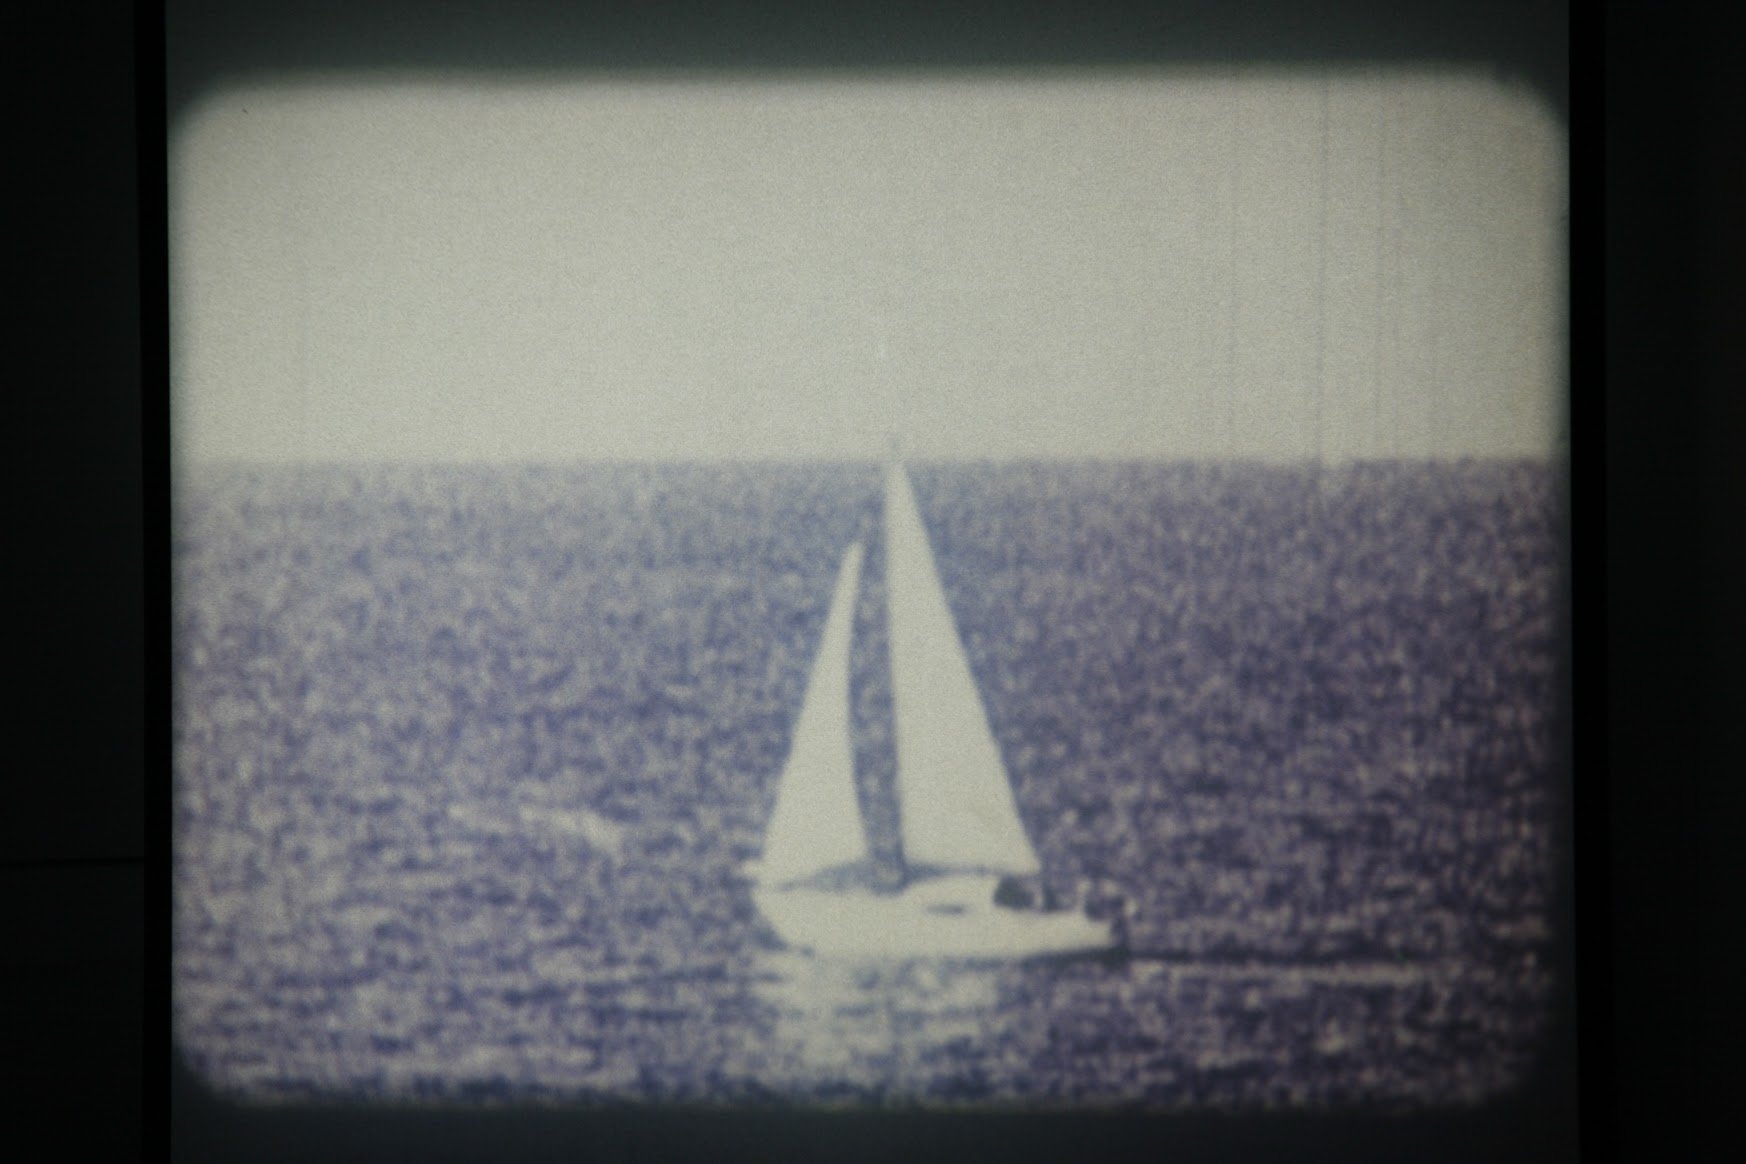  Marcel Broodthaers,  Un Voyage en Mer du Nord  (A Voyage on the North Sea), 1973—1974.   Installation of projected audio-visual recording [16 mm film, colour, silent, 4 min 15s], accompanied by artist's book [offset lithograph printed on double leav